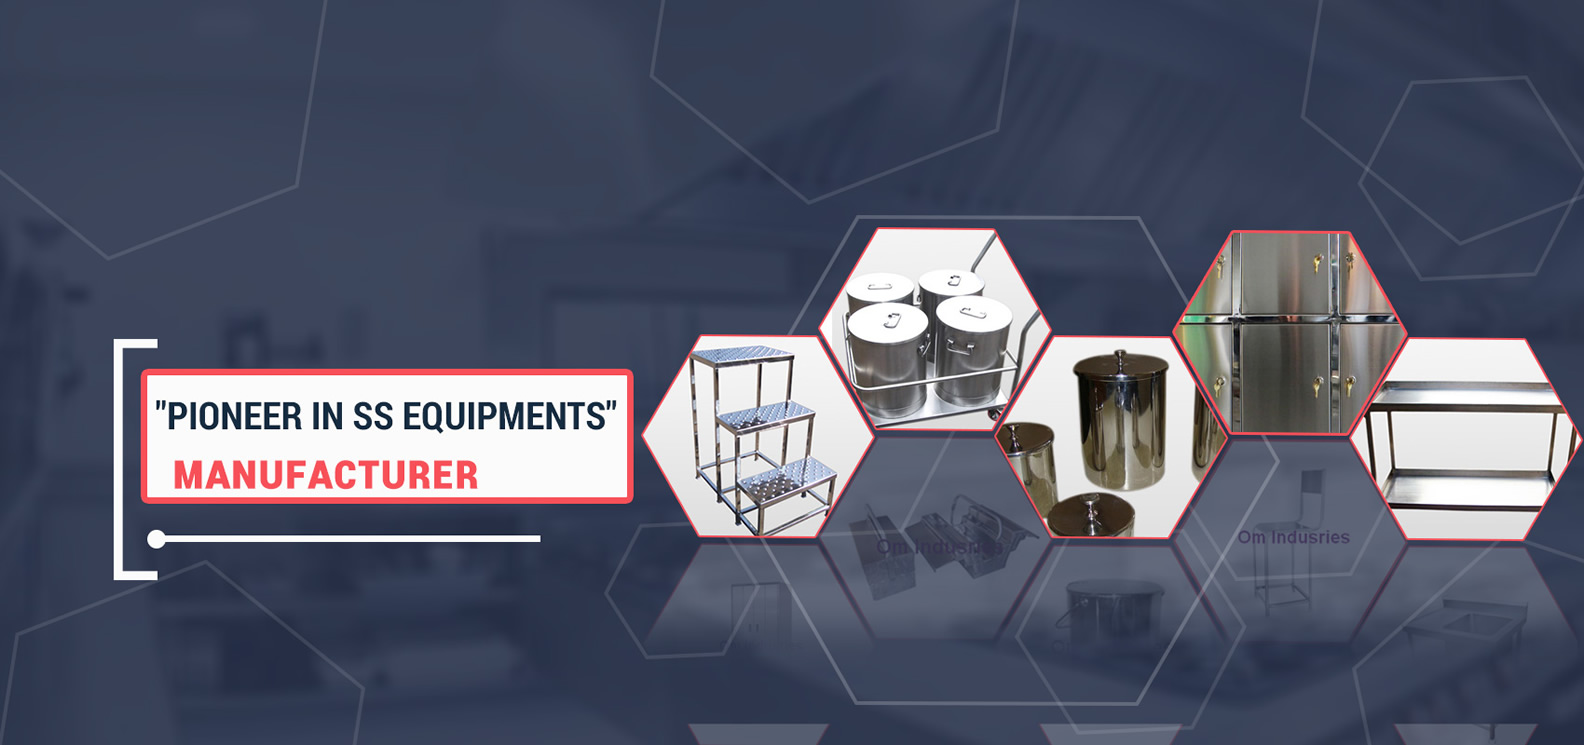 SS Equipments Manufacturer in Ipoh

